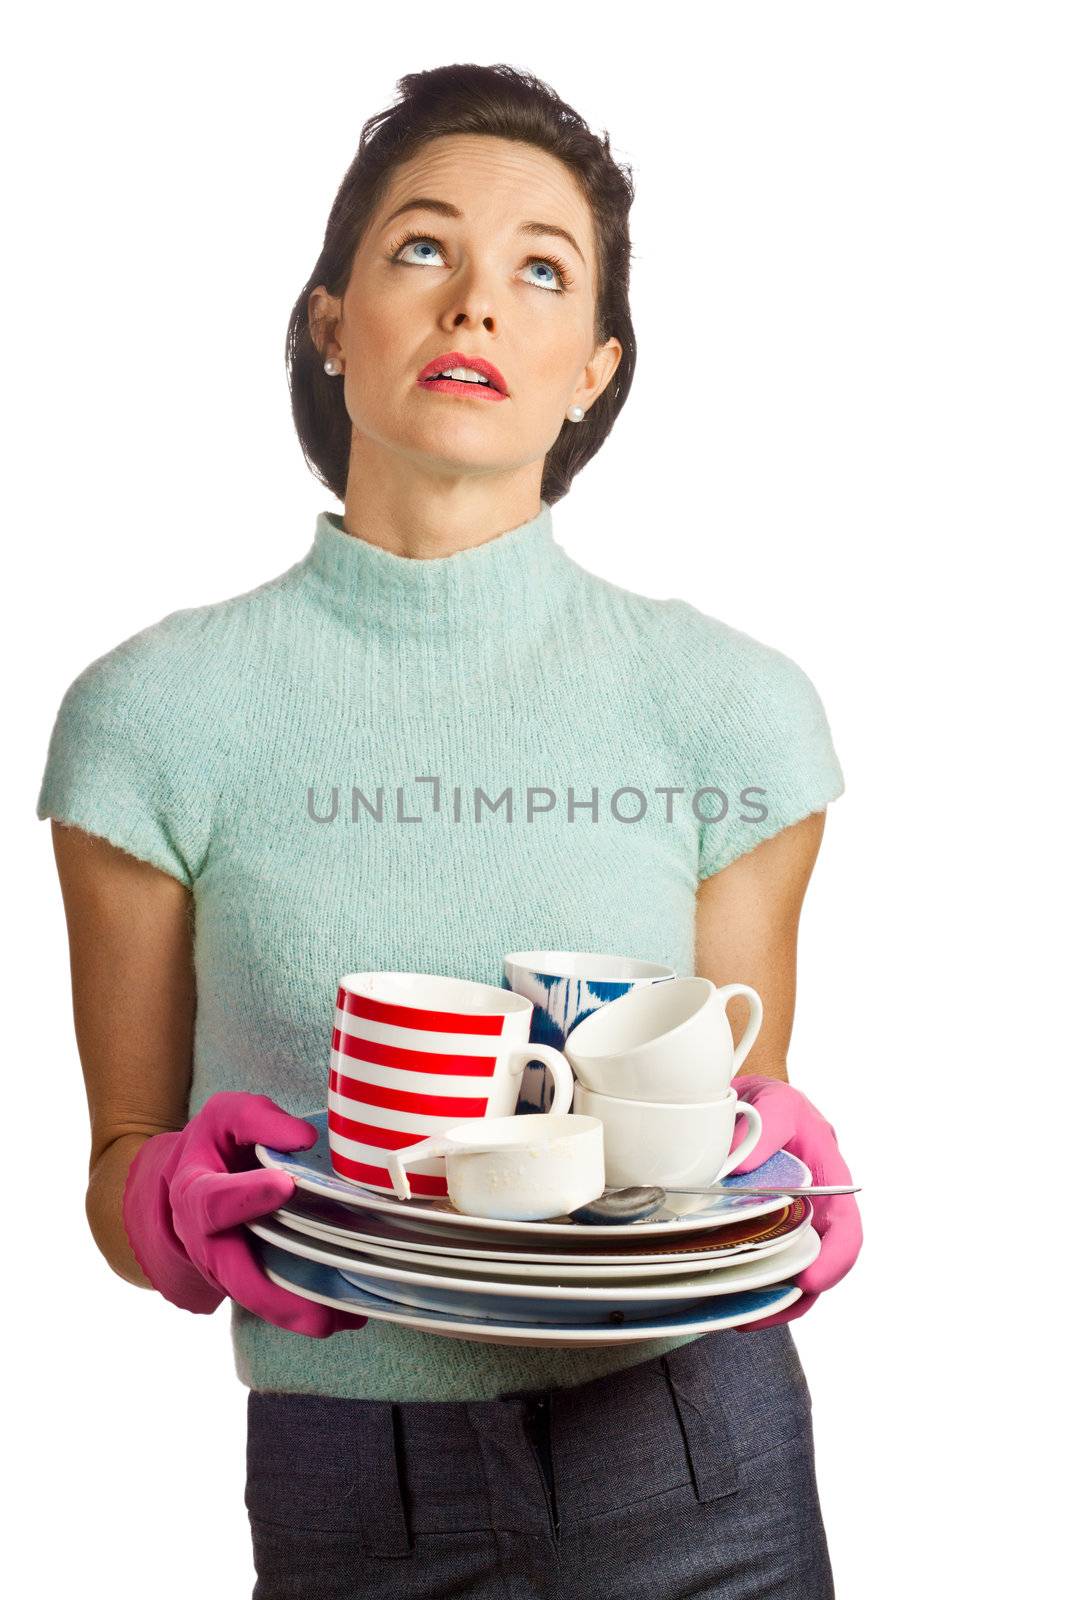 Portrait of a young beautiful housewife holding a pile of dirty dishes and looking fed up. Isolated over white.